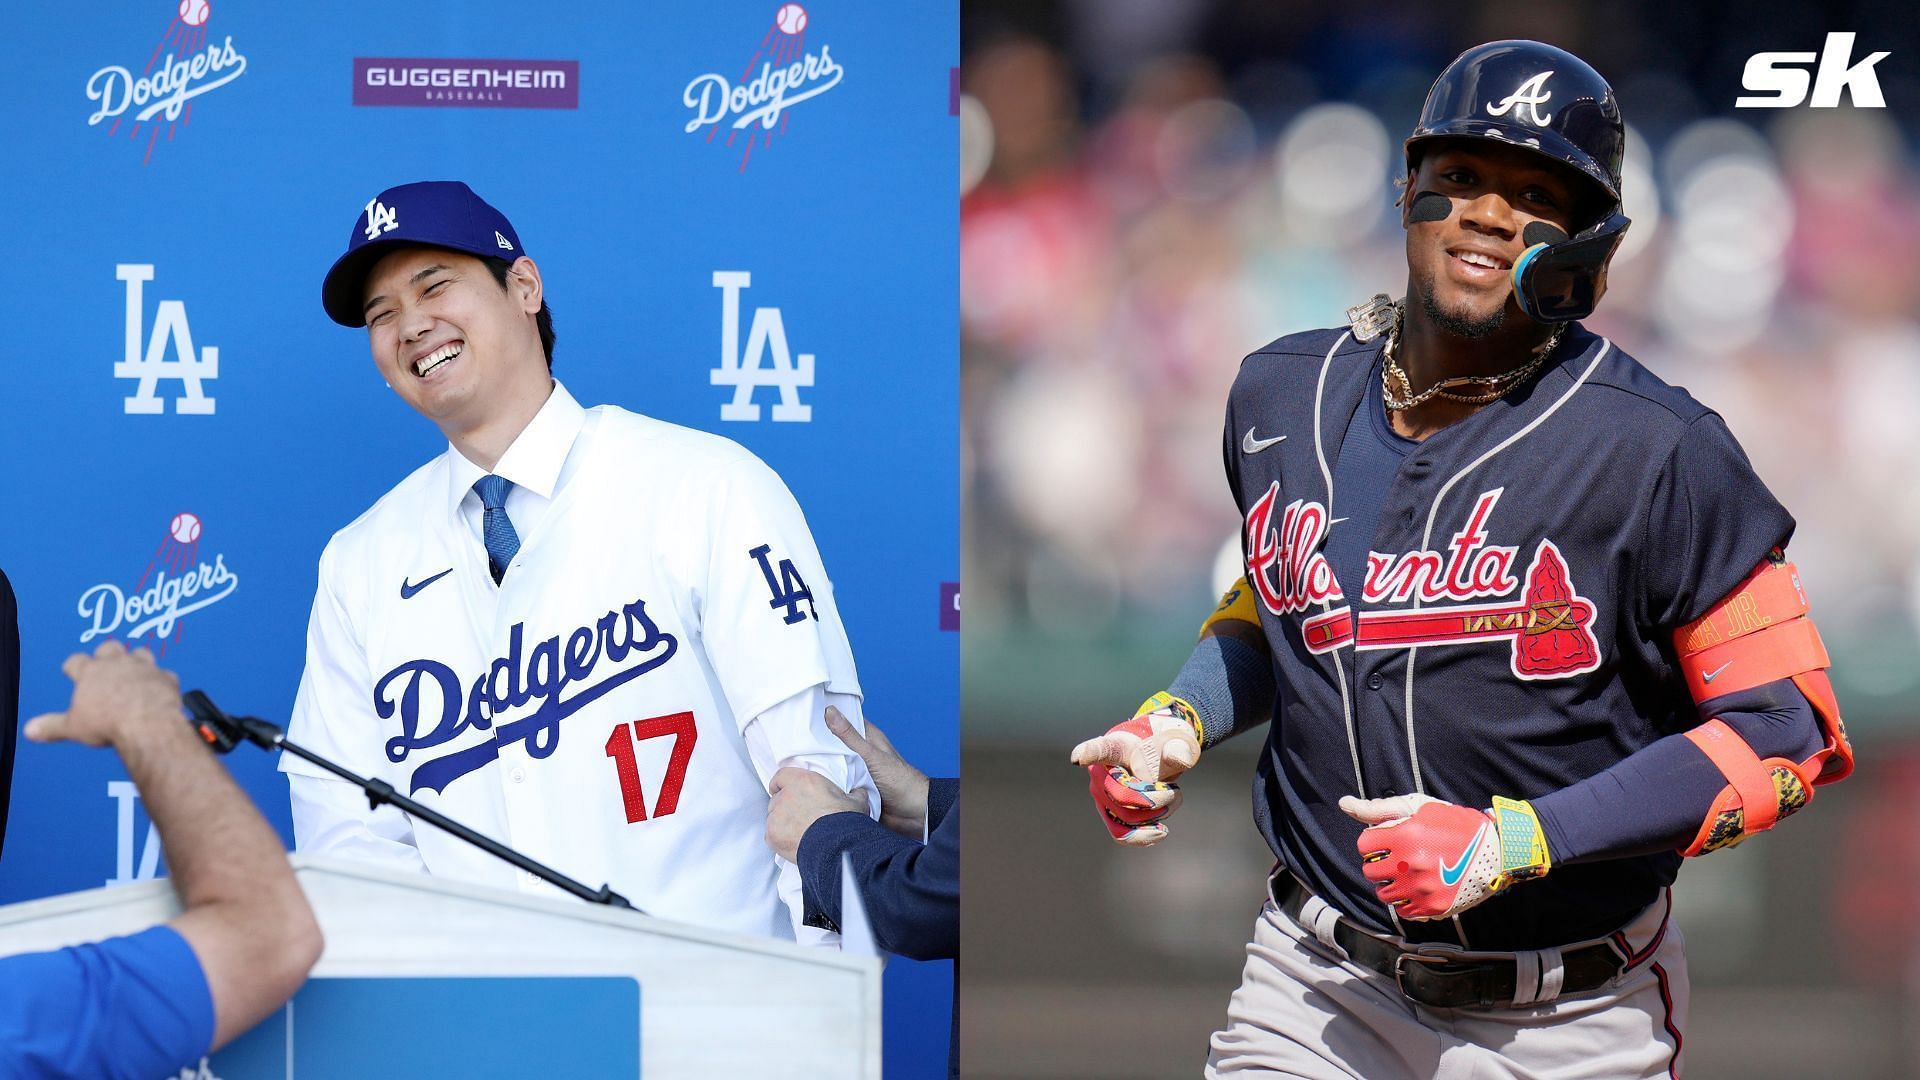 Shohei Ohtani and Ronald Acuna Jr. were given watches on account of their Hank Aaron Award honors